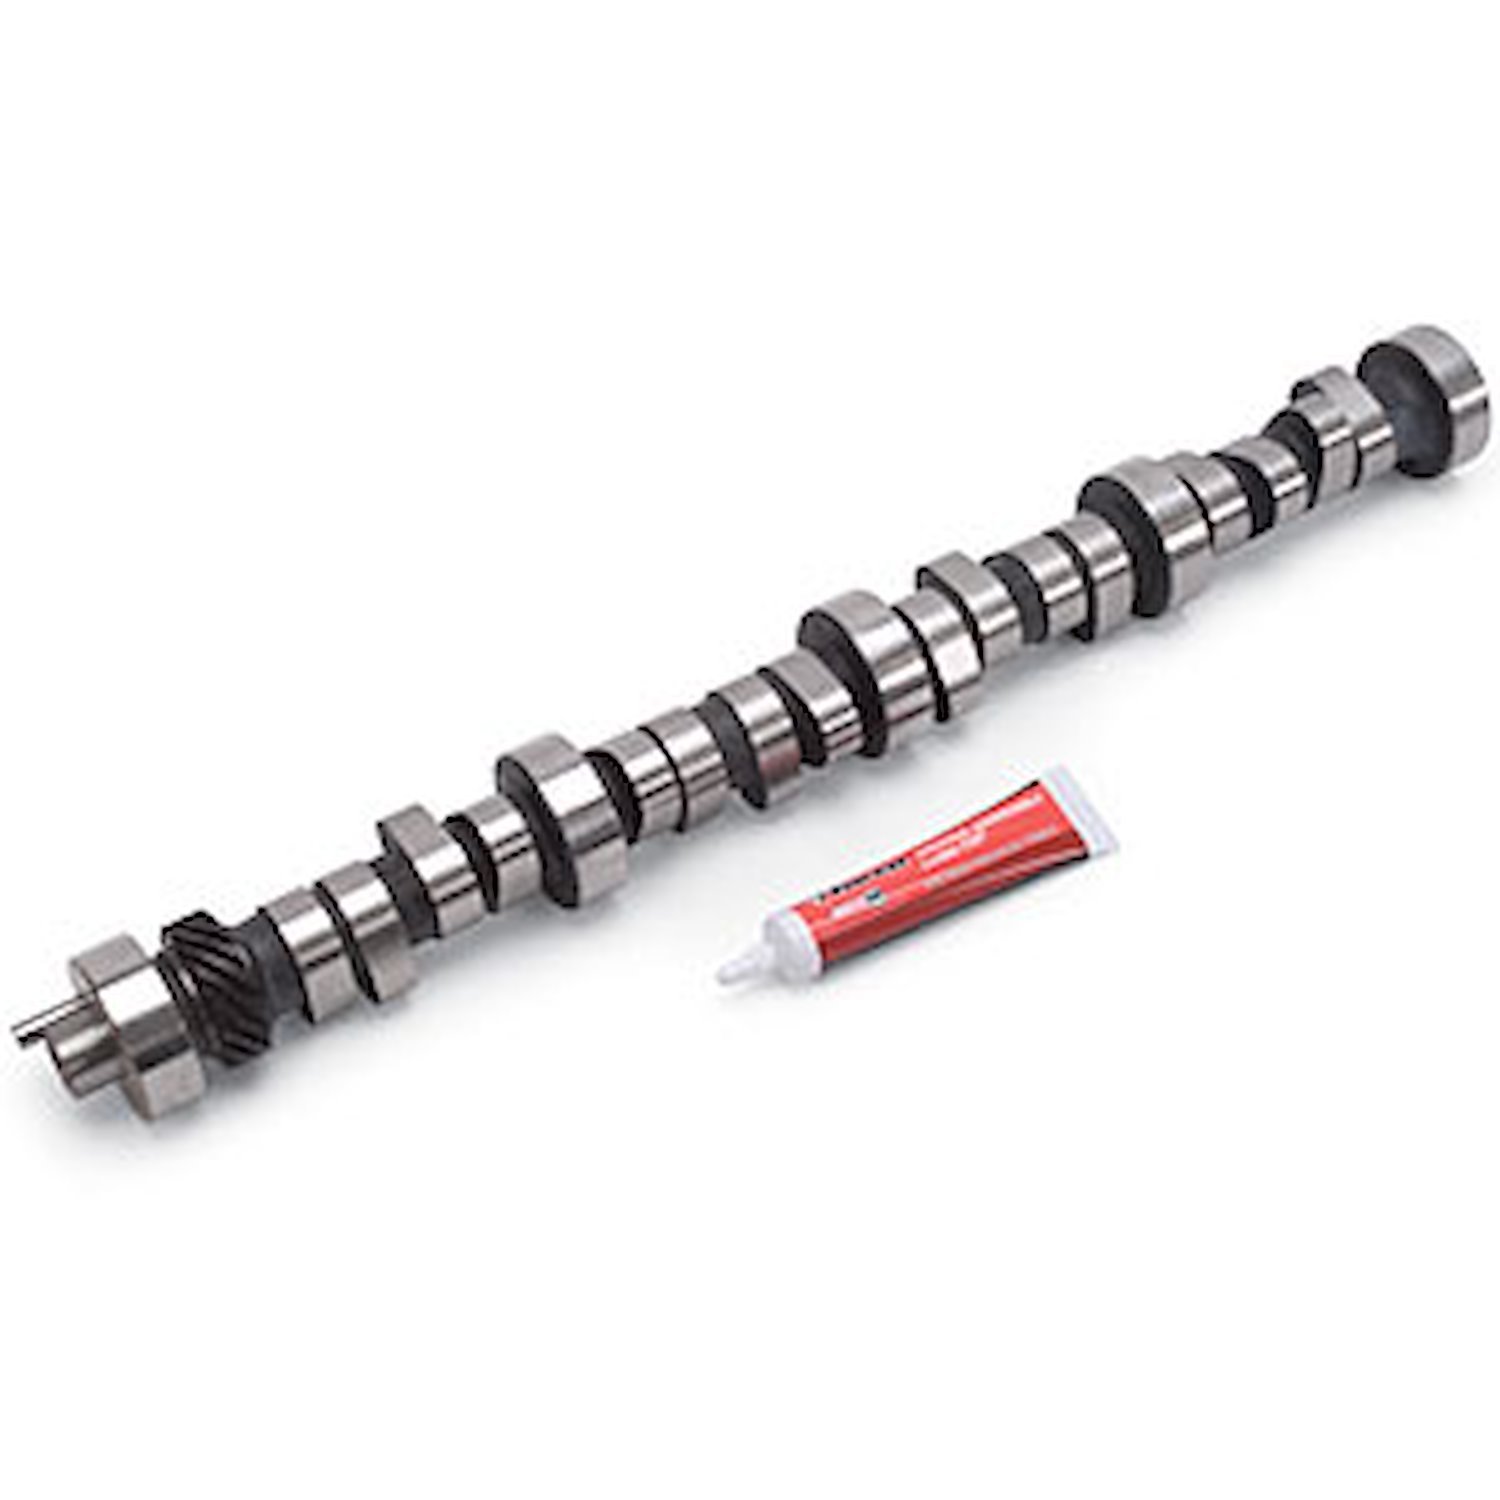 Rollin' Thunder Hydraulic Roller Camshaft for Small Block Ford 351W